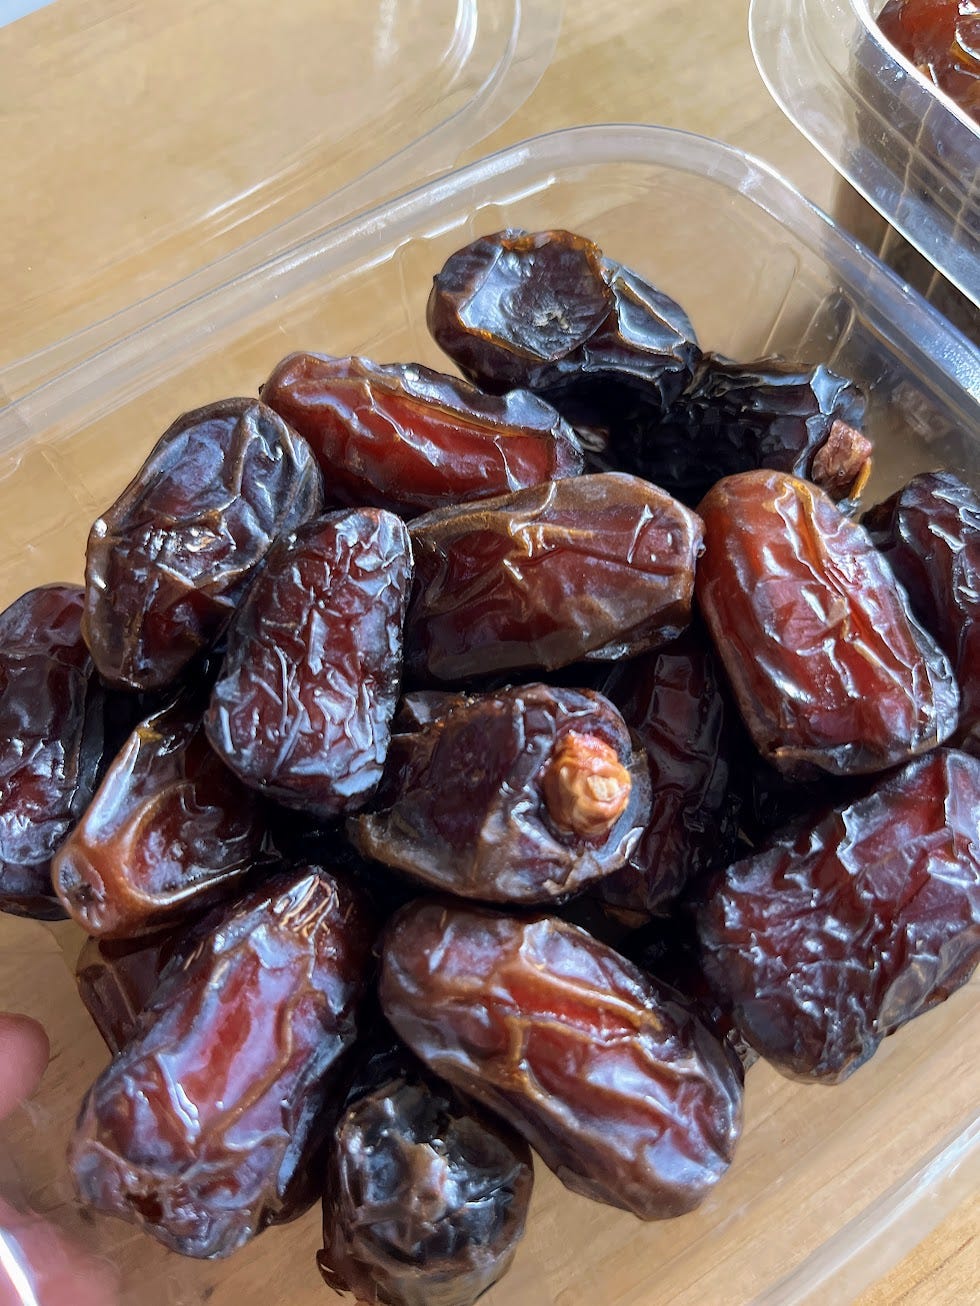 Open container of Black Gold dates